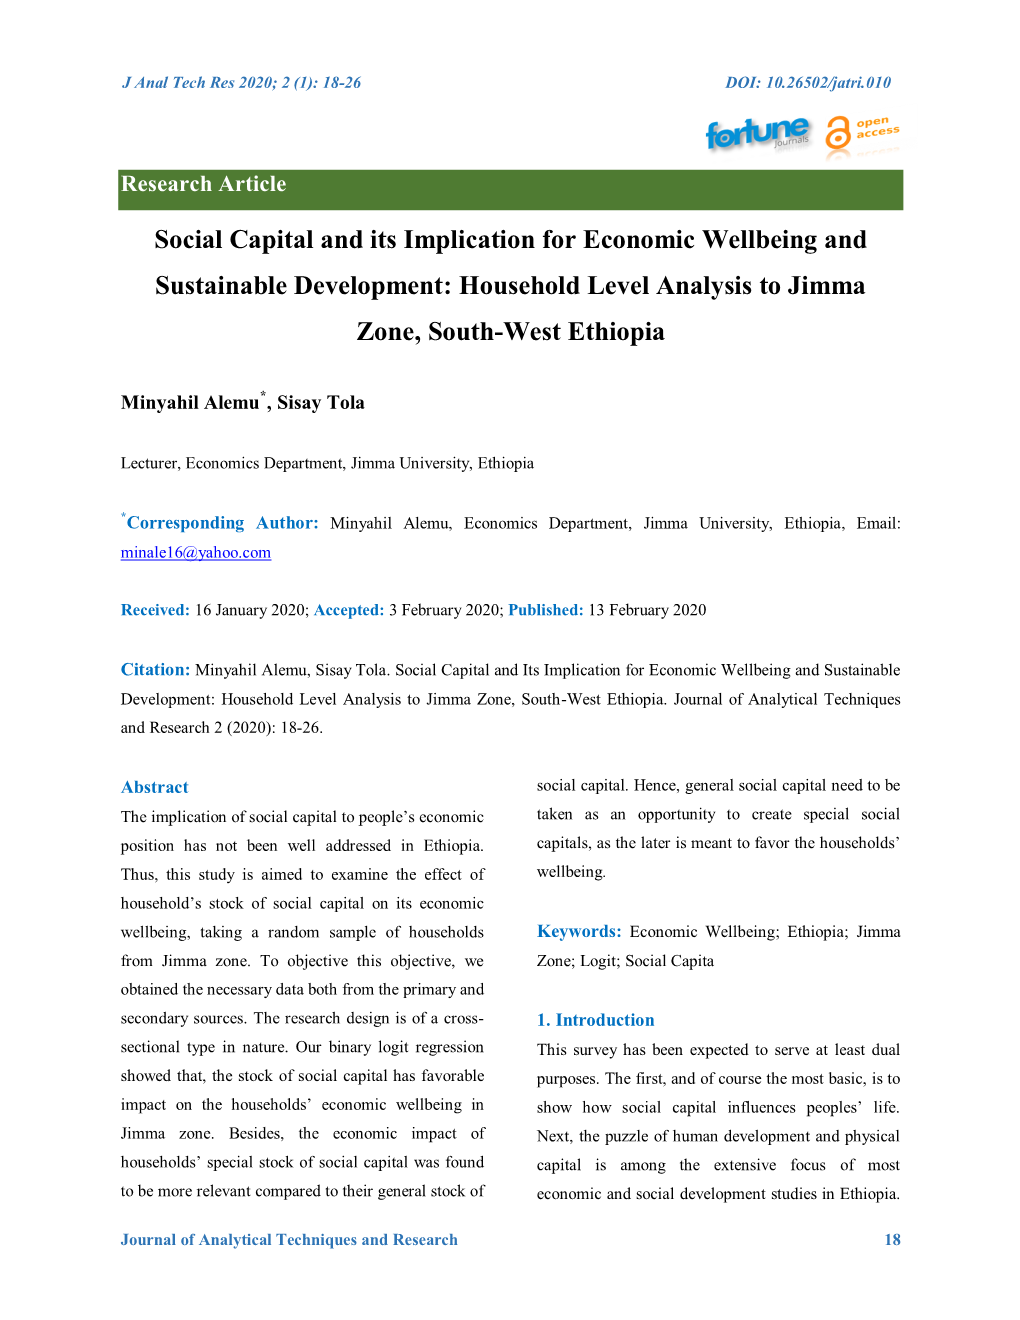 Social Capital and Its Implication for Economic Wellbeing and Sustainable Development: Household Level Analysis to Jimma Zone, South-West Ethiopia